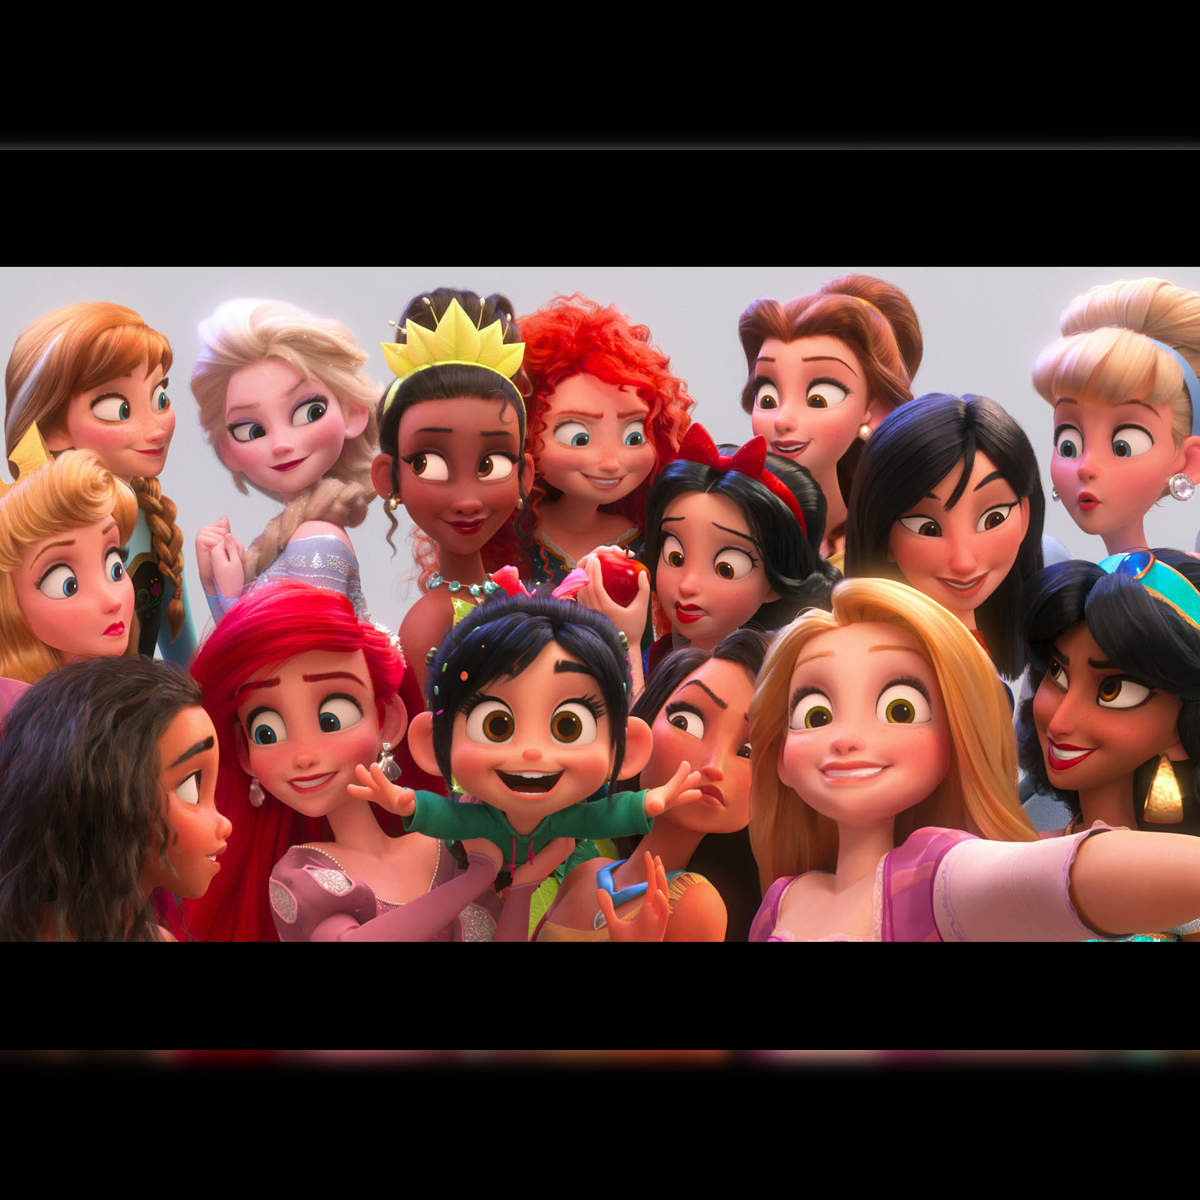 Disney princesses: Ever seen 14 Disney princesses in one frame? The  characters unite for 'Ralph Breaks the Internet' - The Economic Times